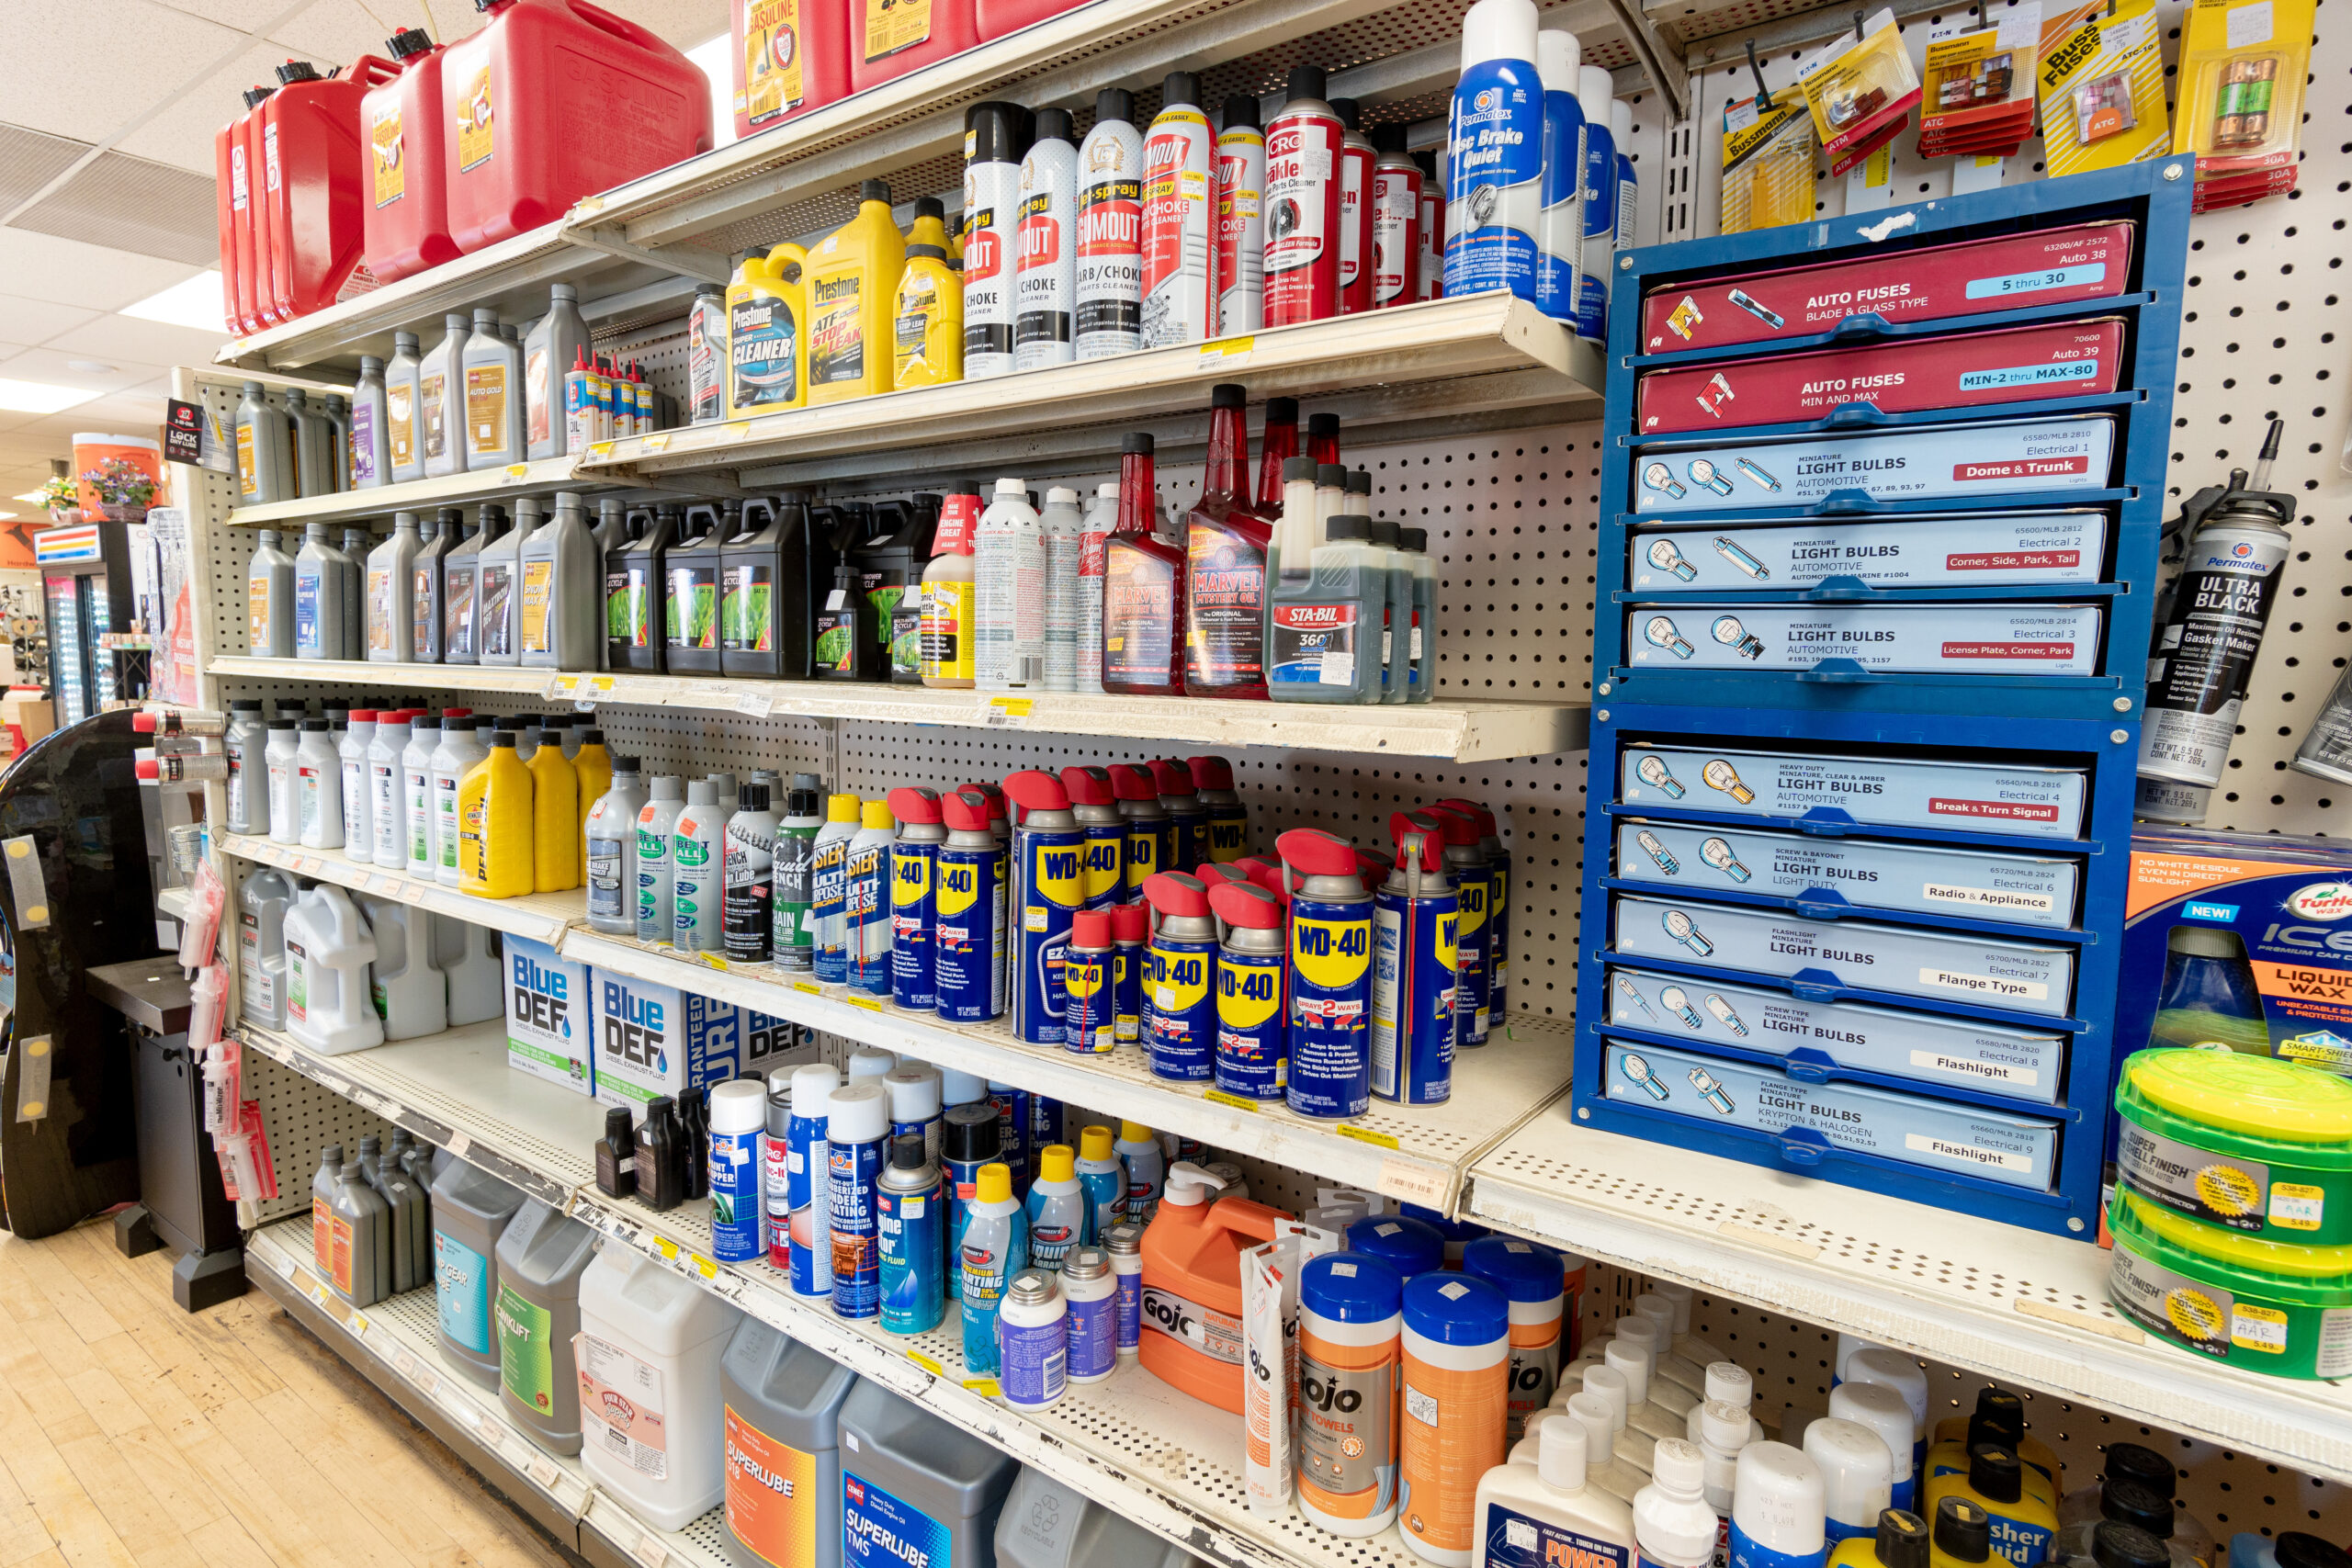 A shelf at Four Star containing brands like WD-40, Gum Out, Prestone, and Cenex